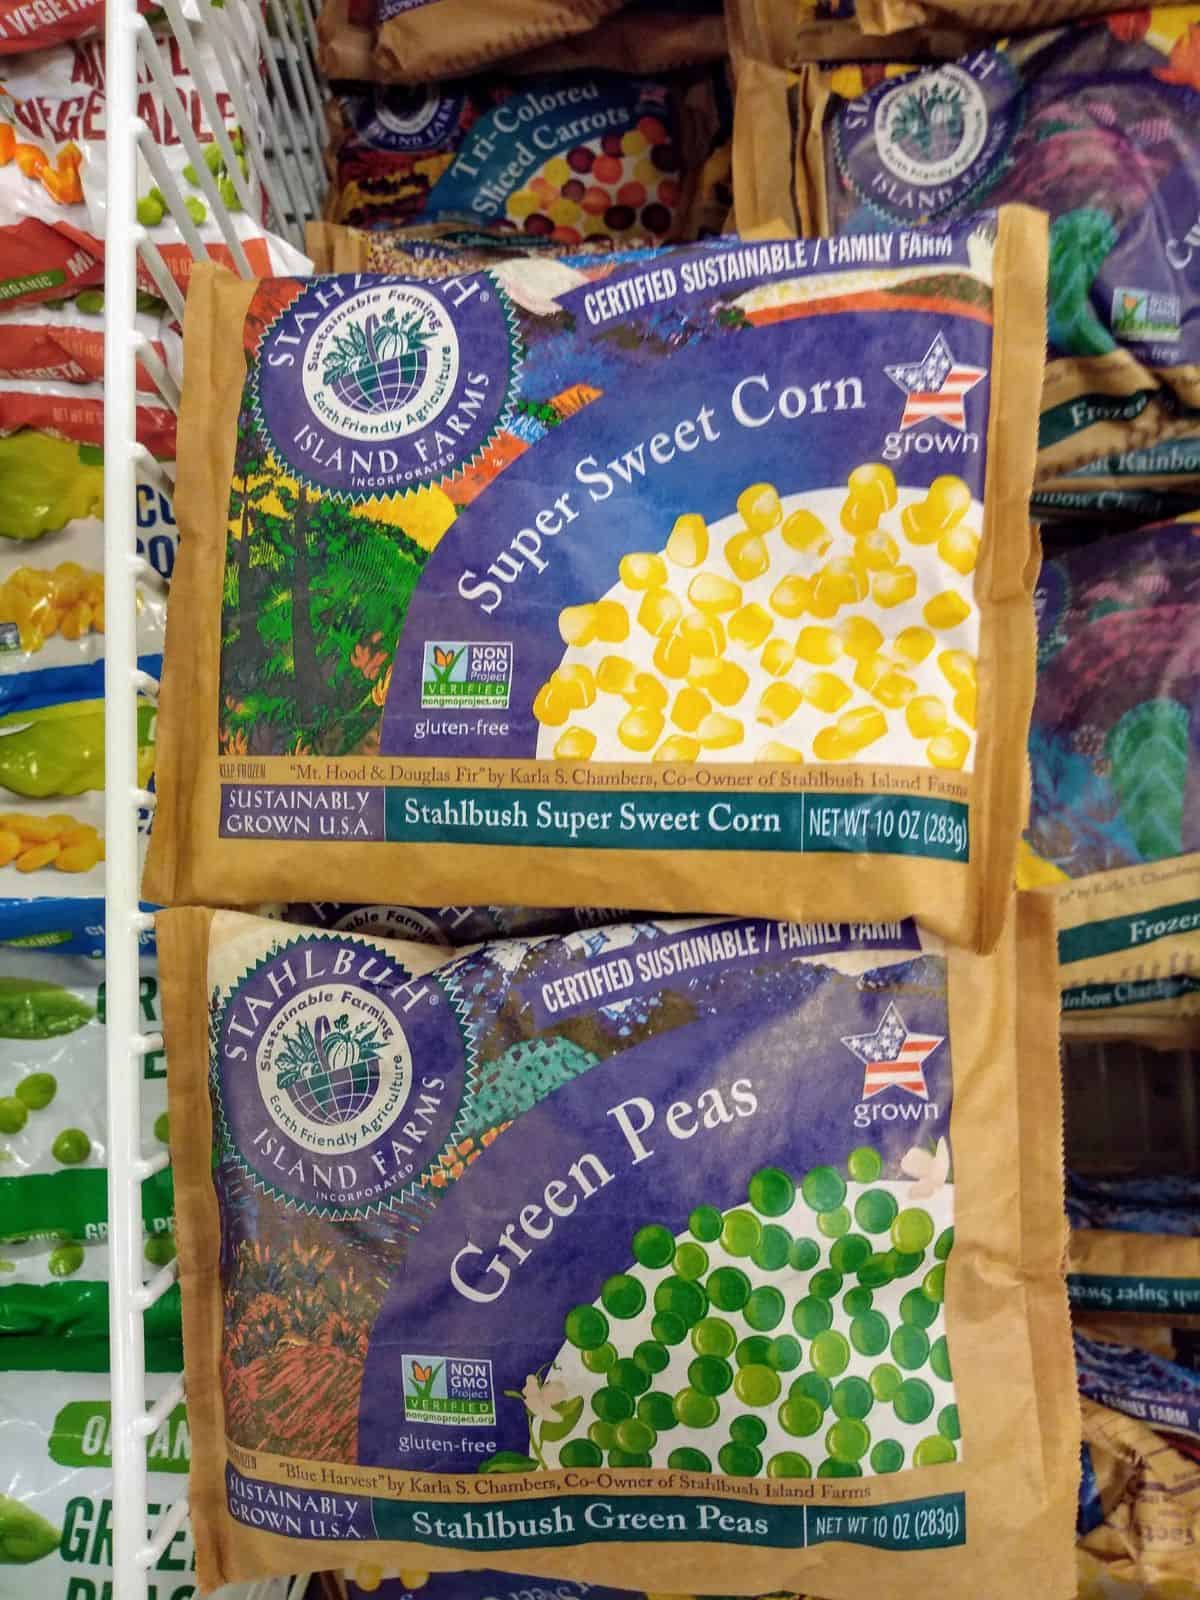 Frozen Super sweet corn and green peas in brown bags in the freezer section of a grocery store.